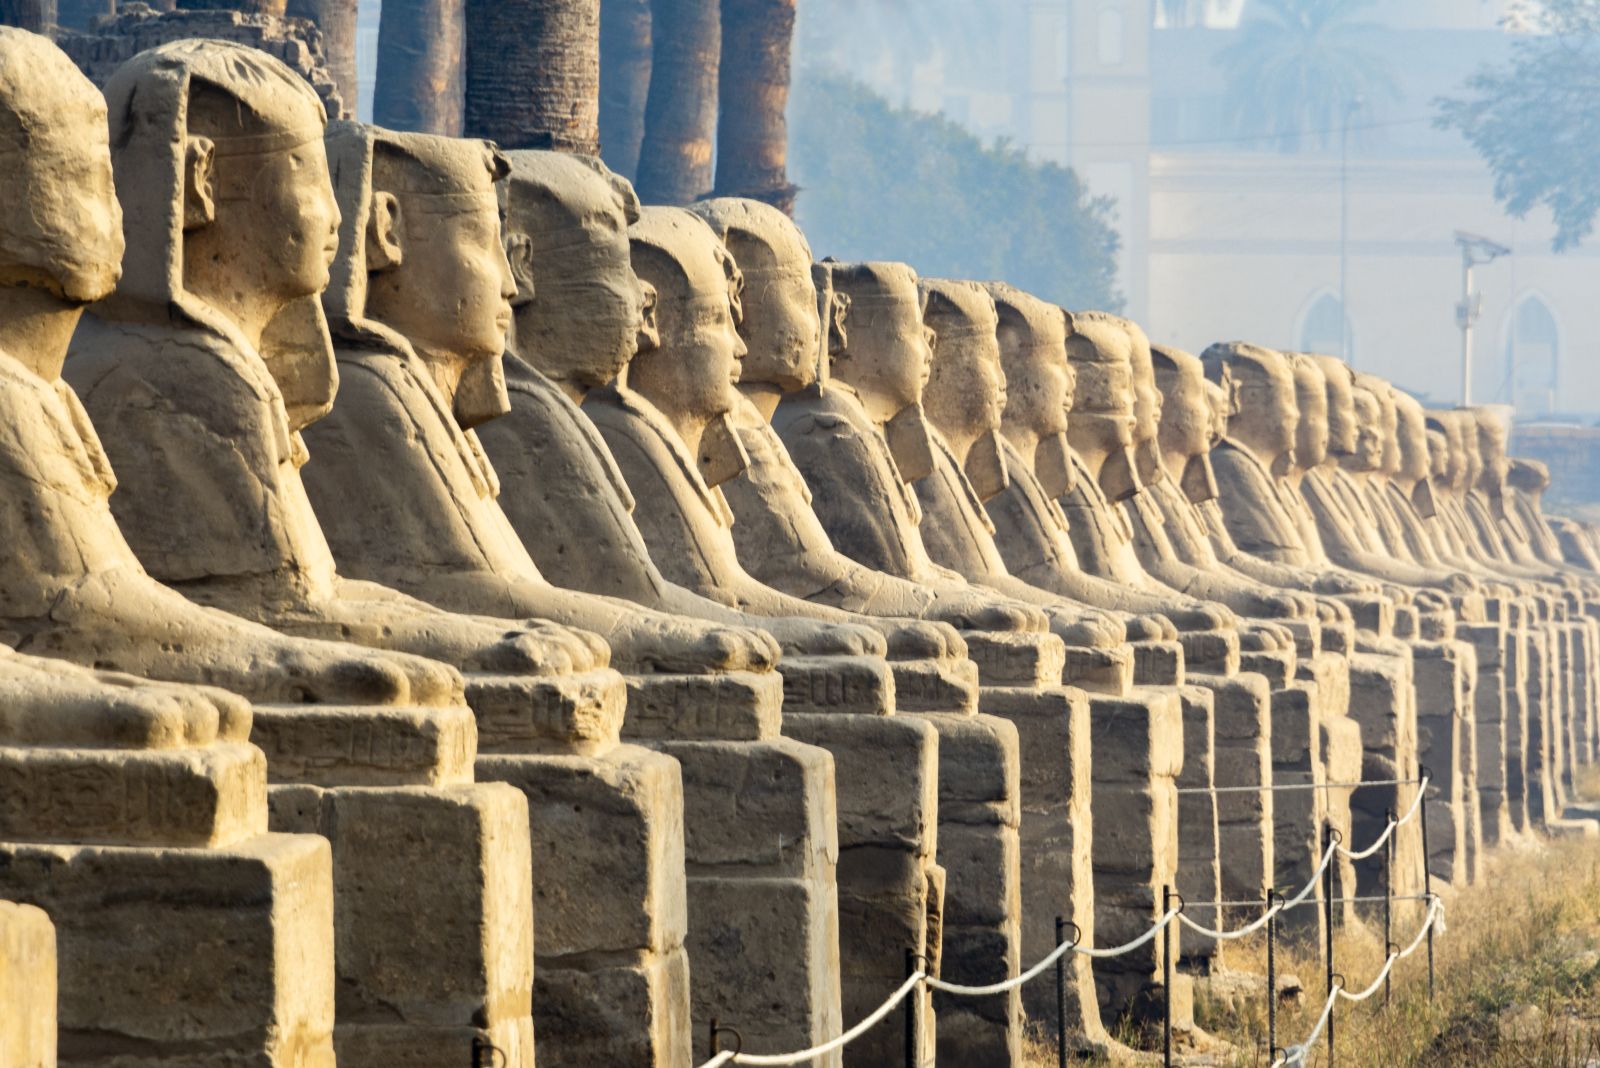 Luxor's Avenue of the Sphinxes